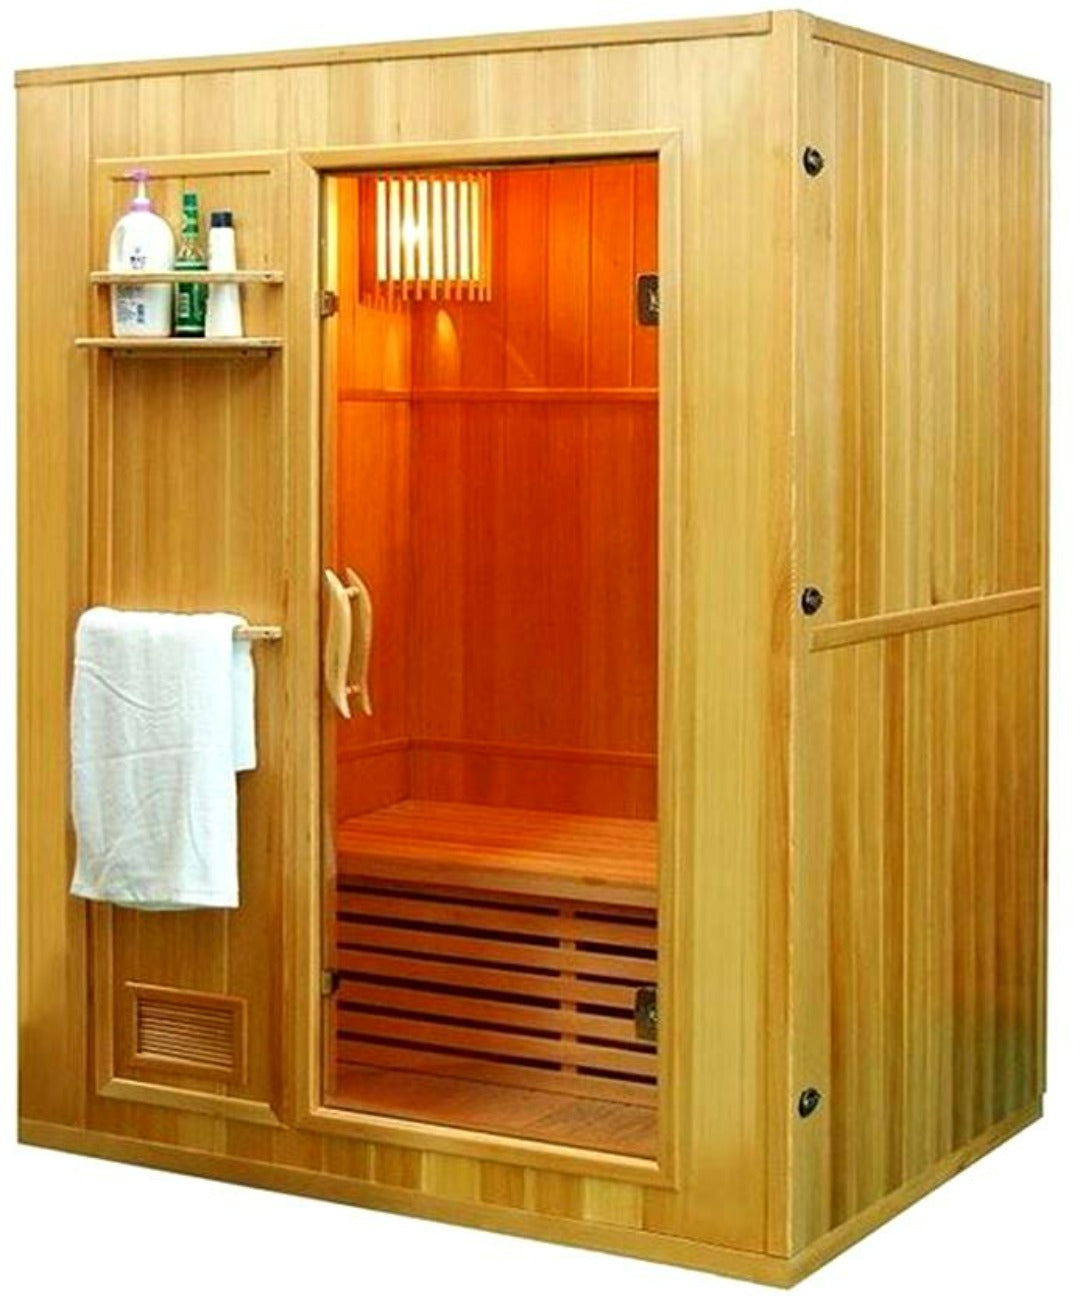 Canadian Hemlock Traditional Wet? Dry Steam Sauna Spa for 2 to 3 Persons. 6KW Heater, Front View